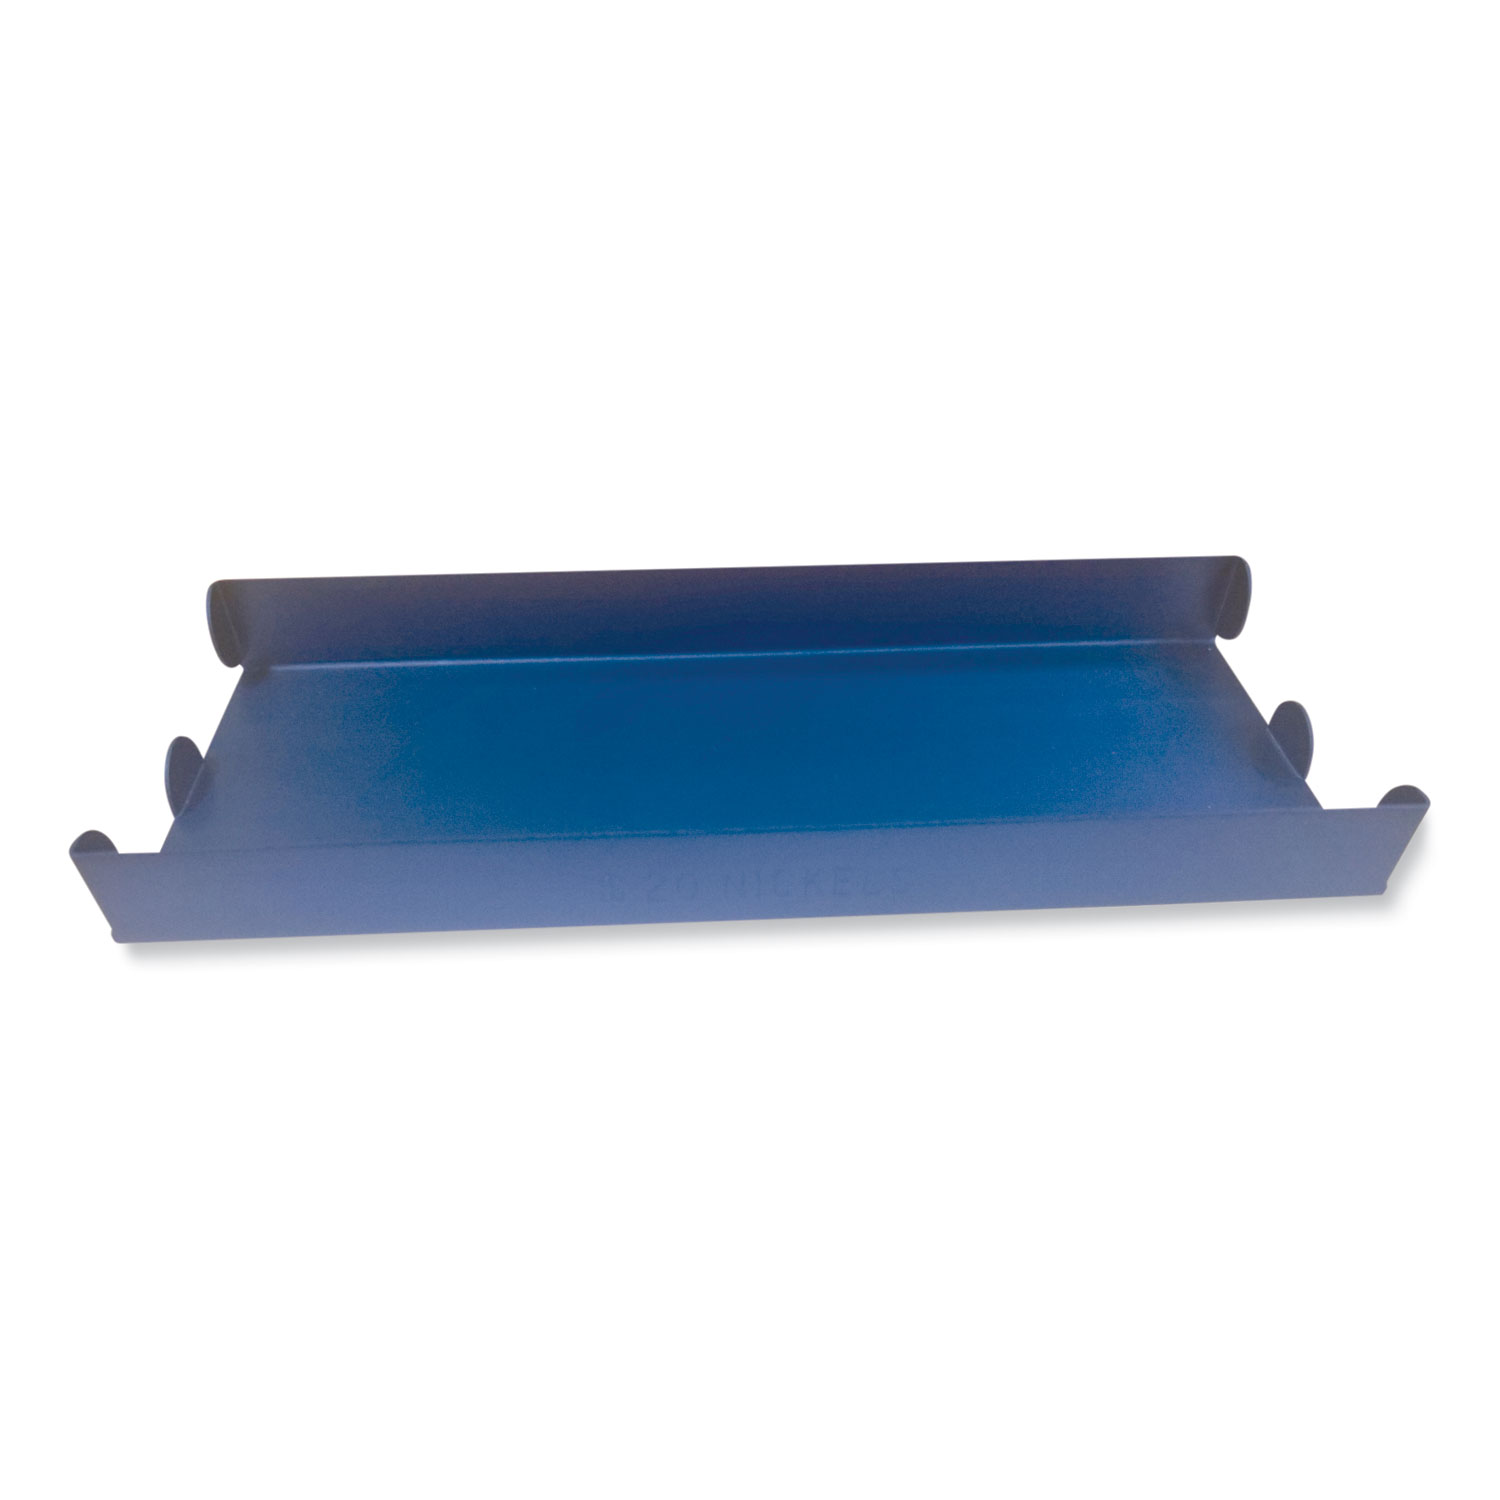  CONTROLTEK 560066 Metal Coin Tray, Nickels, 3.5 x 10 x 1.75, Blue (CNK560066) 